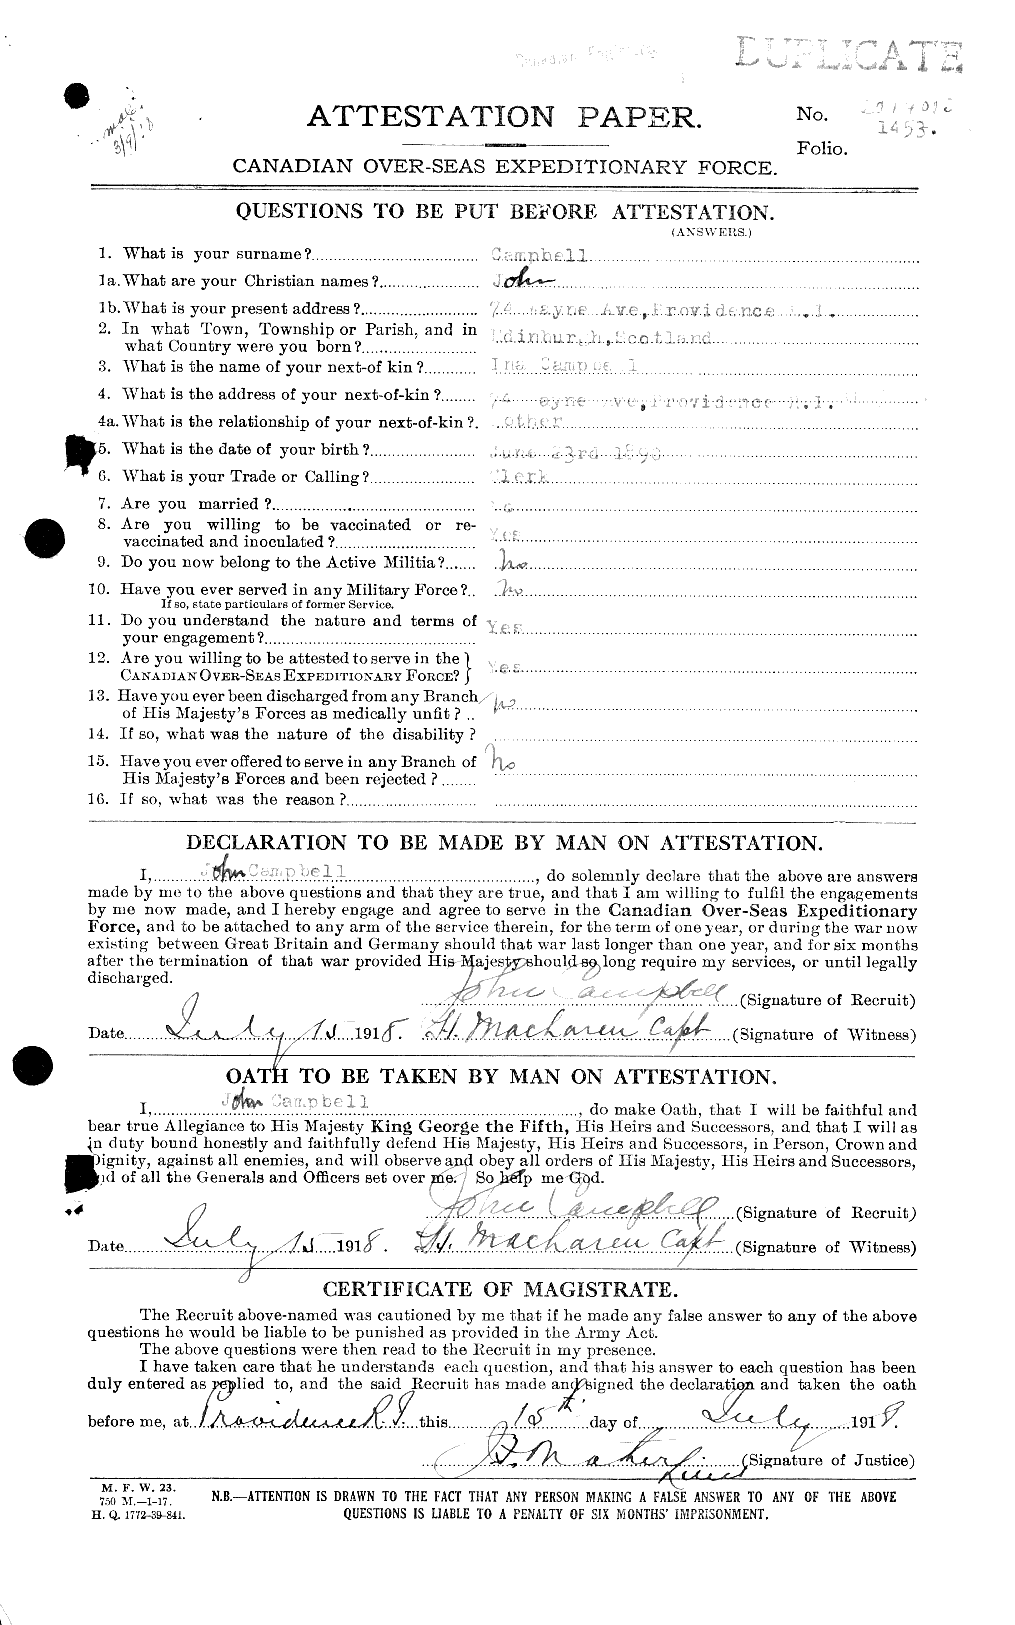 Personnel Records of the First World War - CEF 008478a